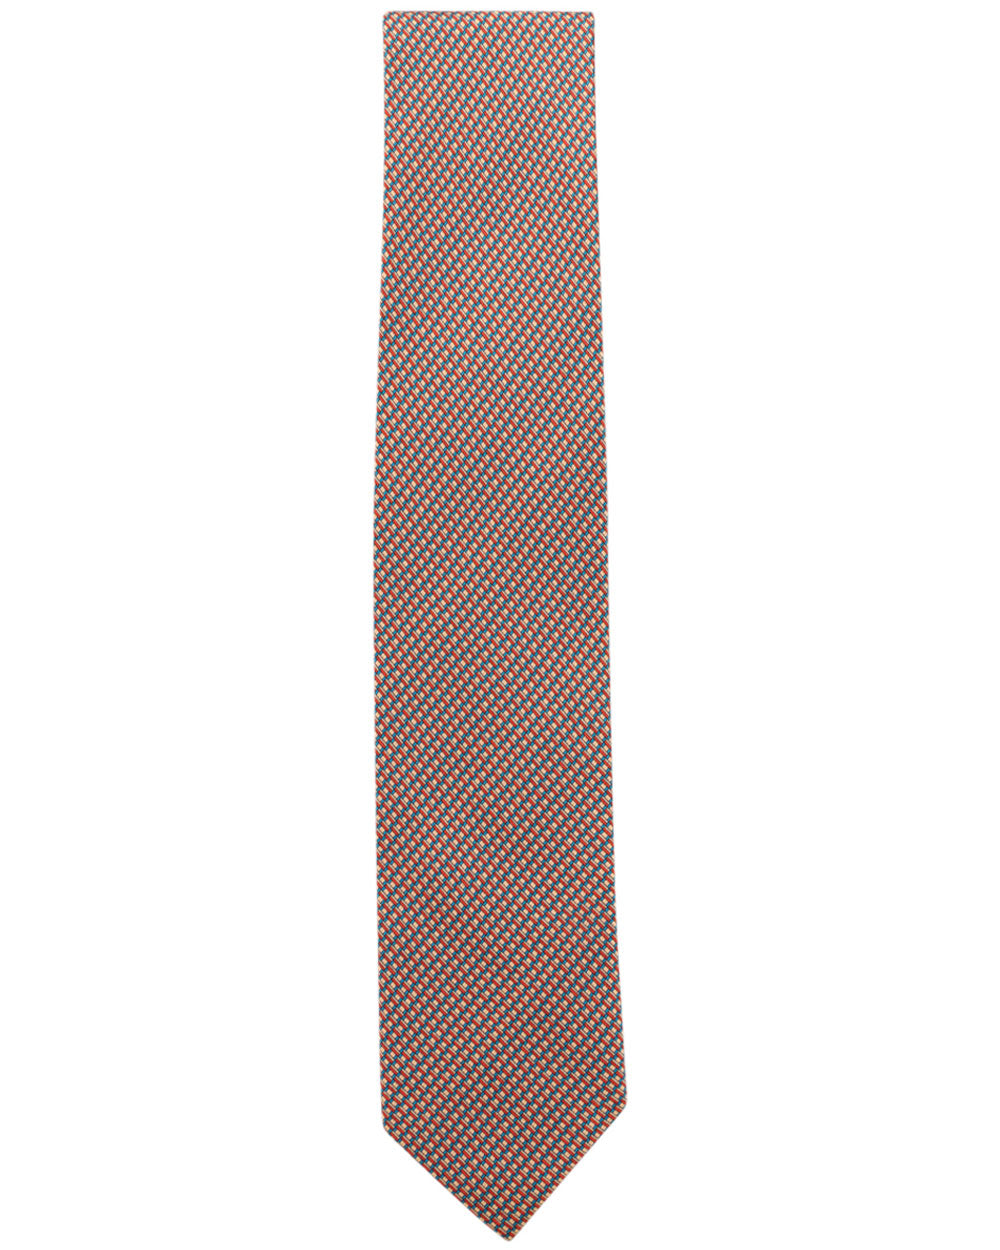 Peach and Blue Micro Patterned Silk Tie